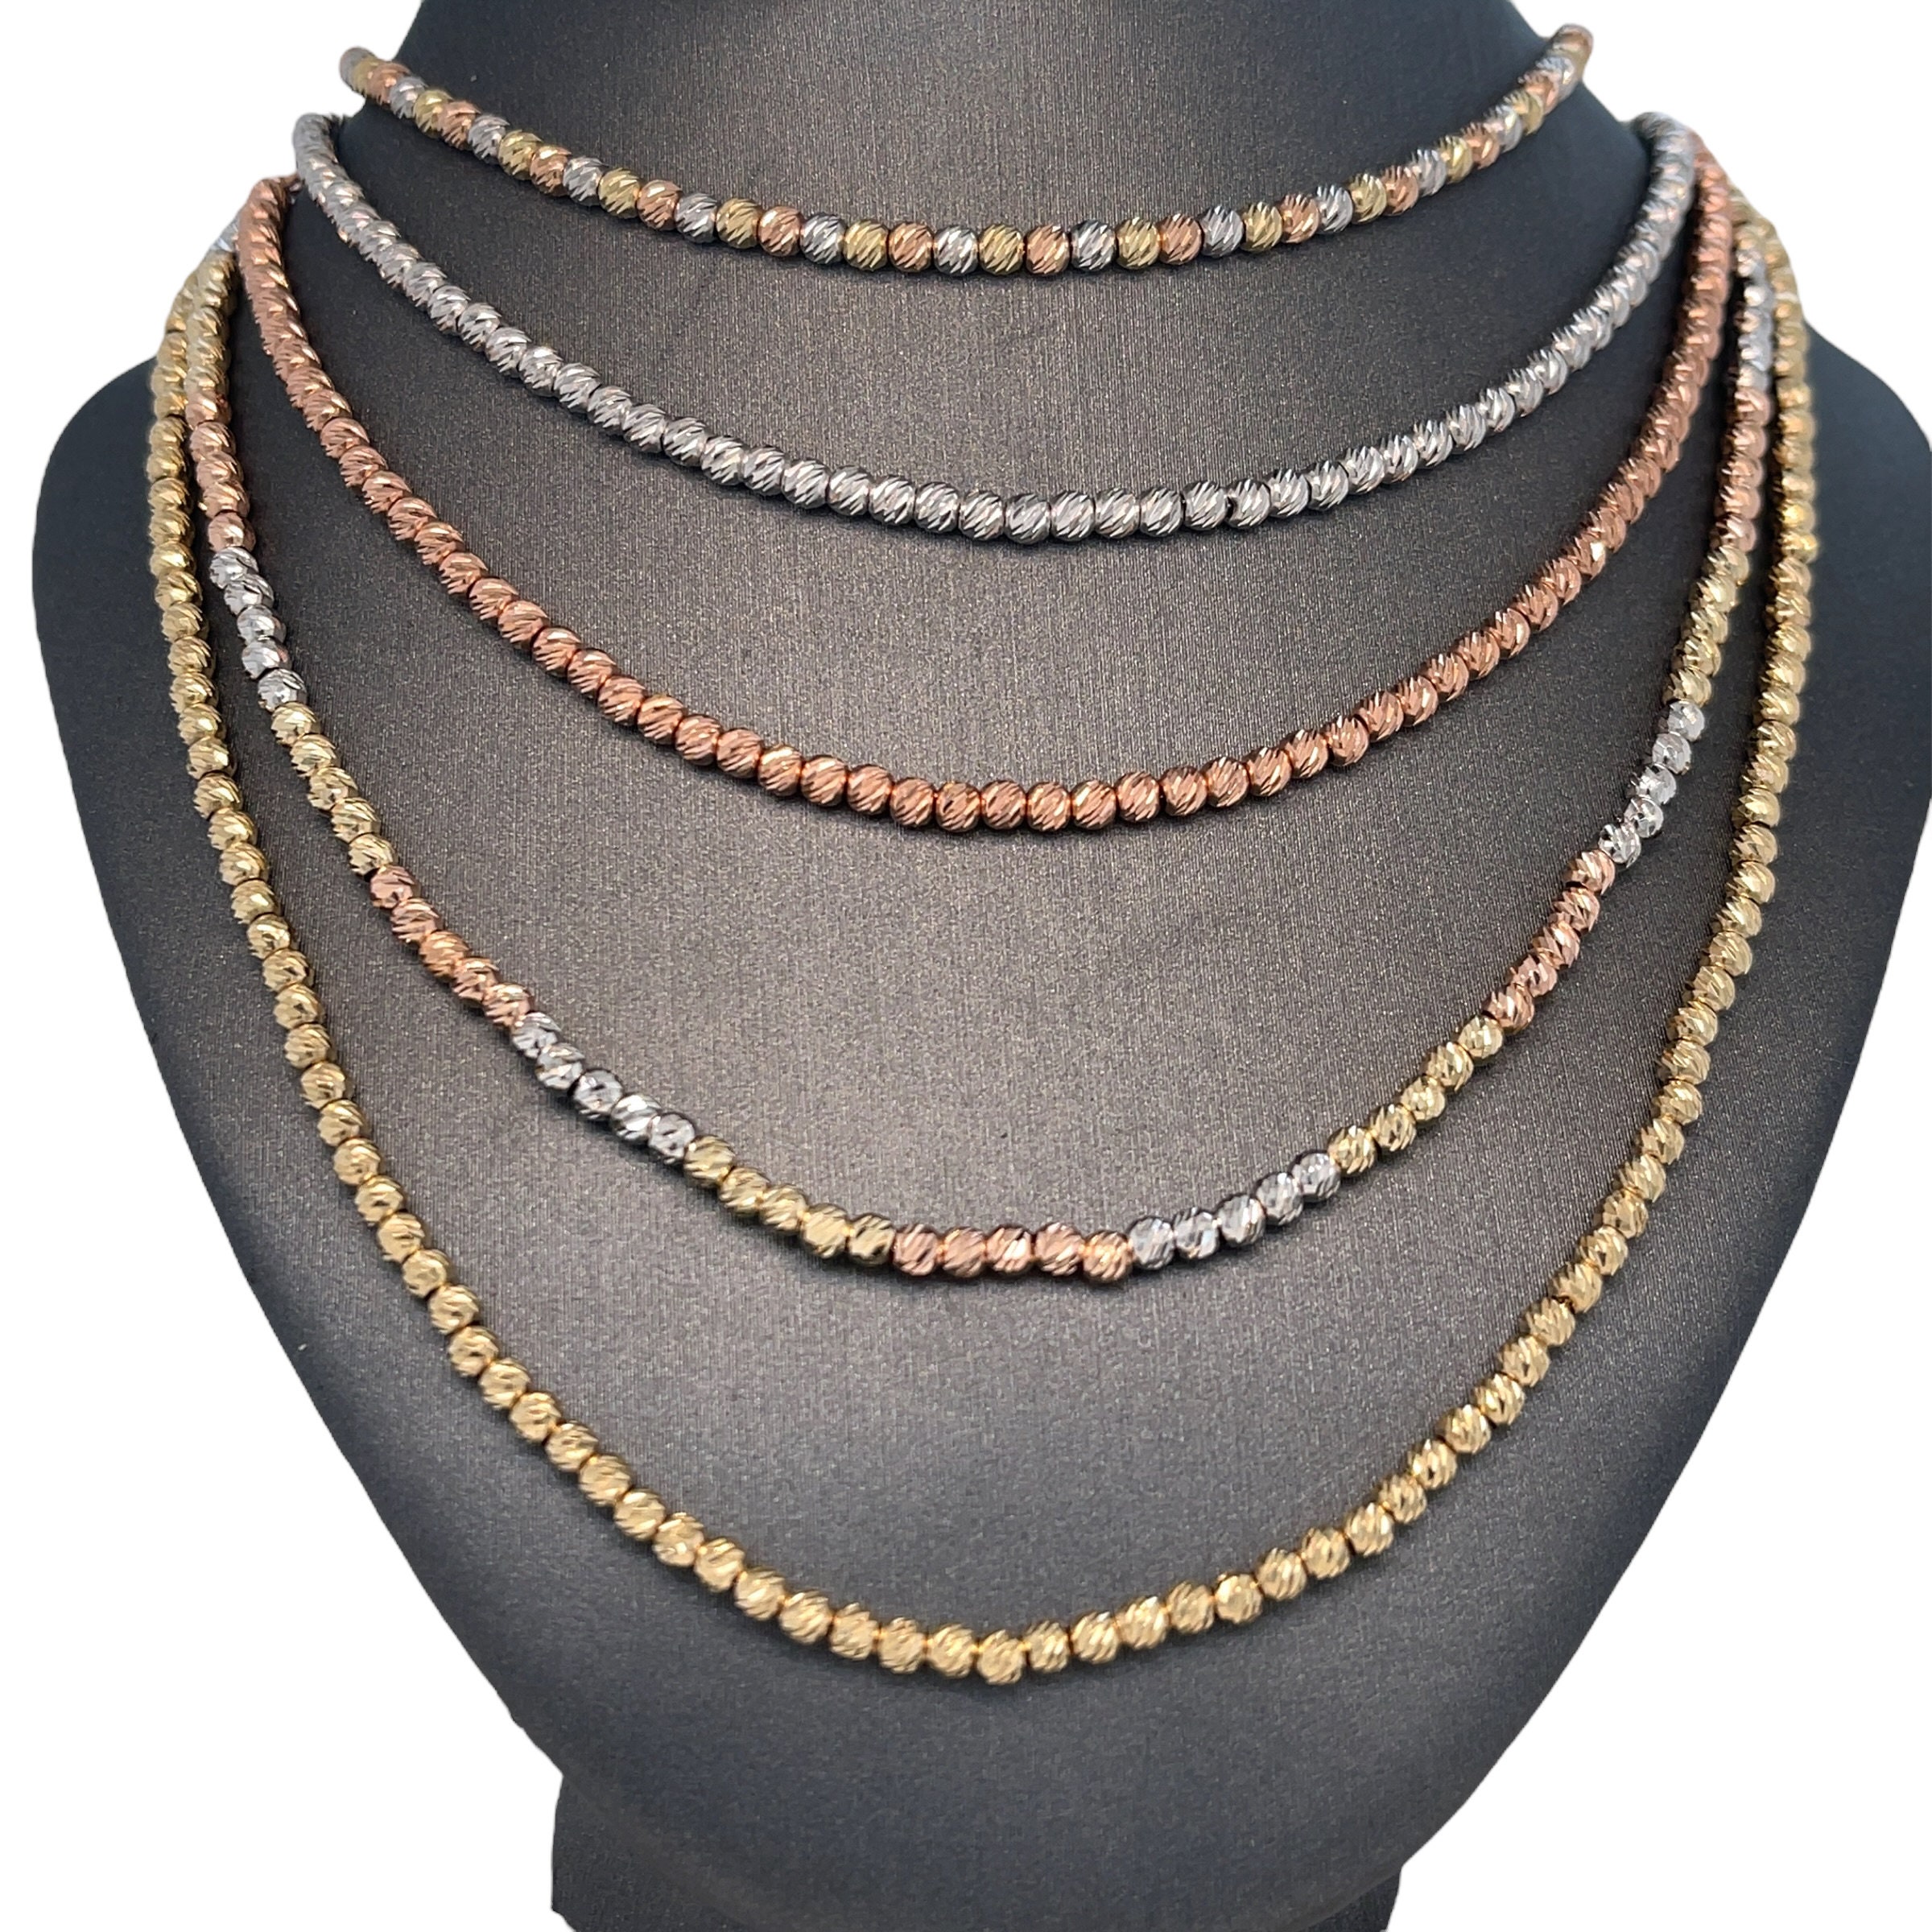 2-10mm 14kt Yellow Gold Graduated Bead Necklace | Ross-Simons